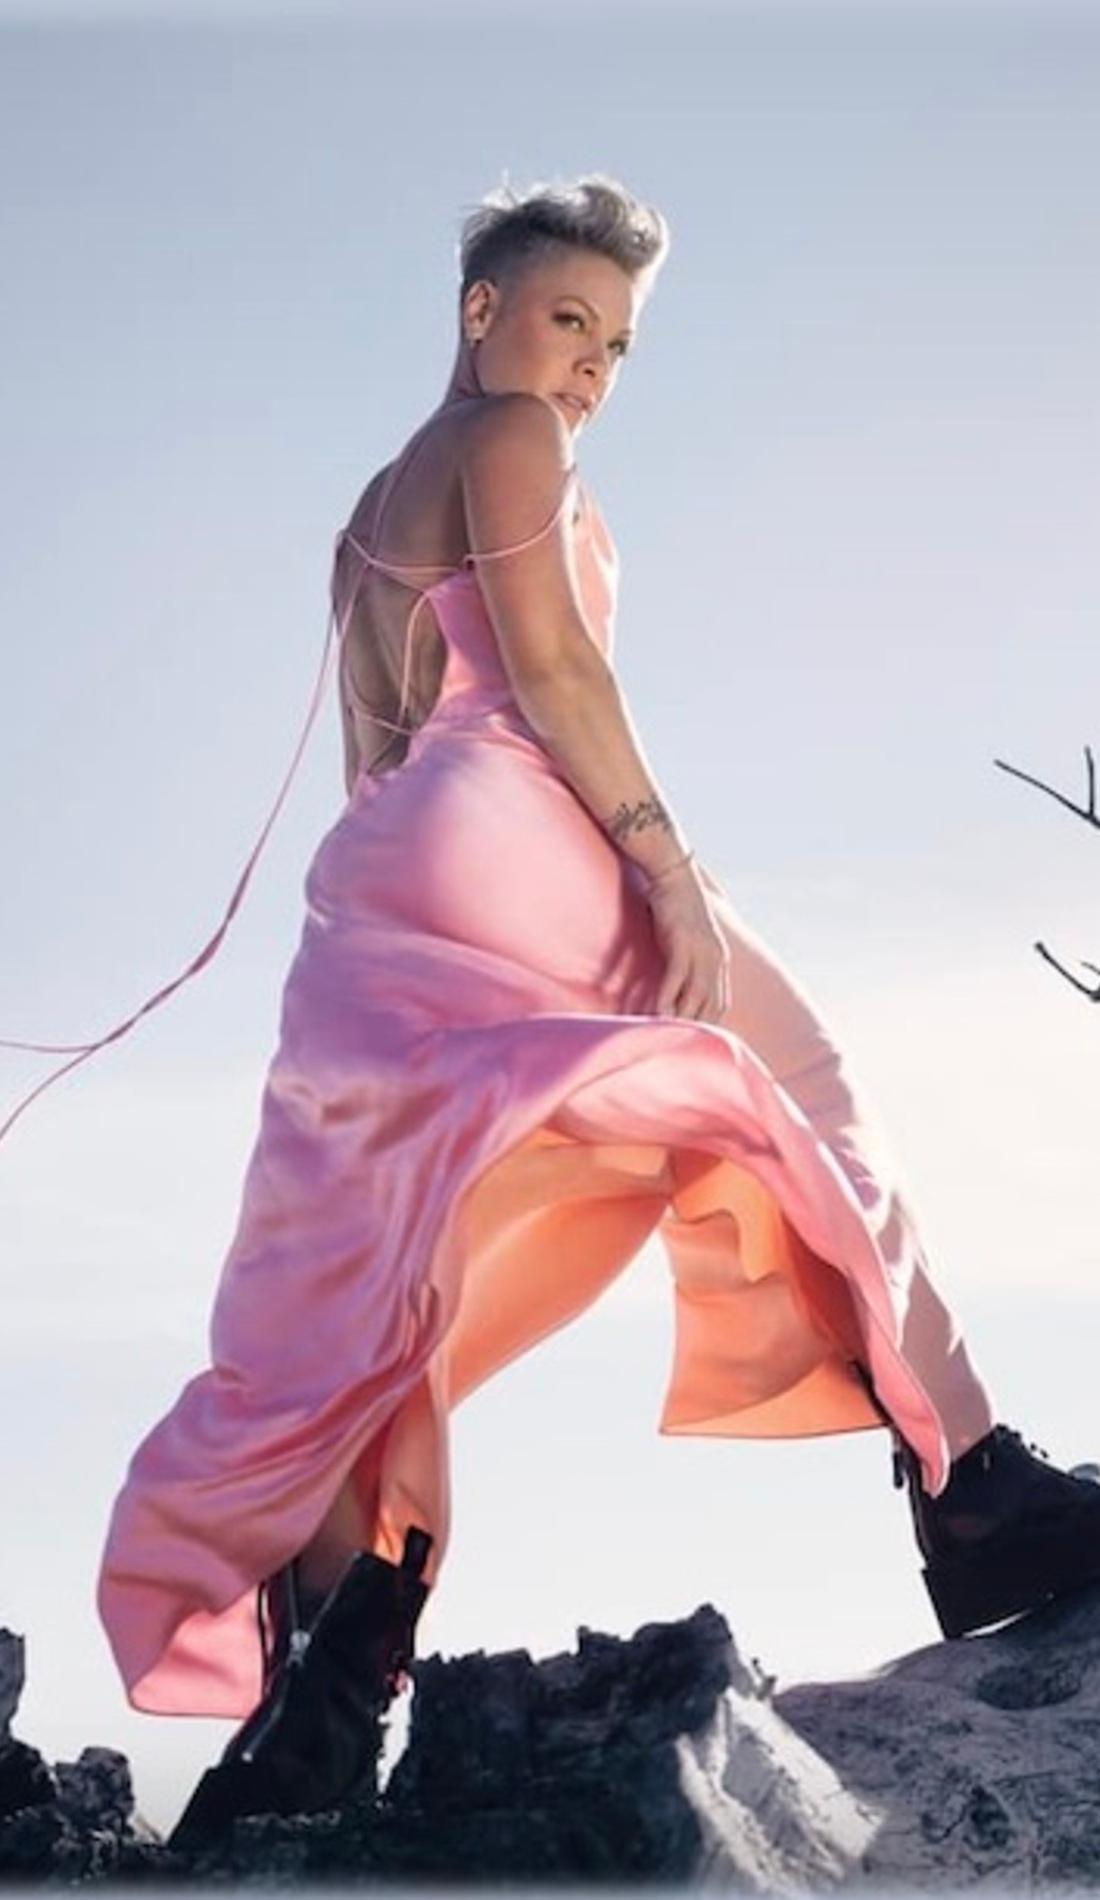 Pink's new album 'Trustfall' will make you cry, dance: review